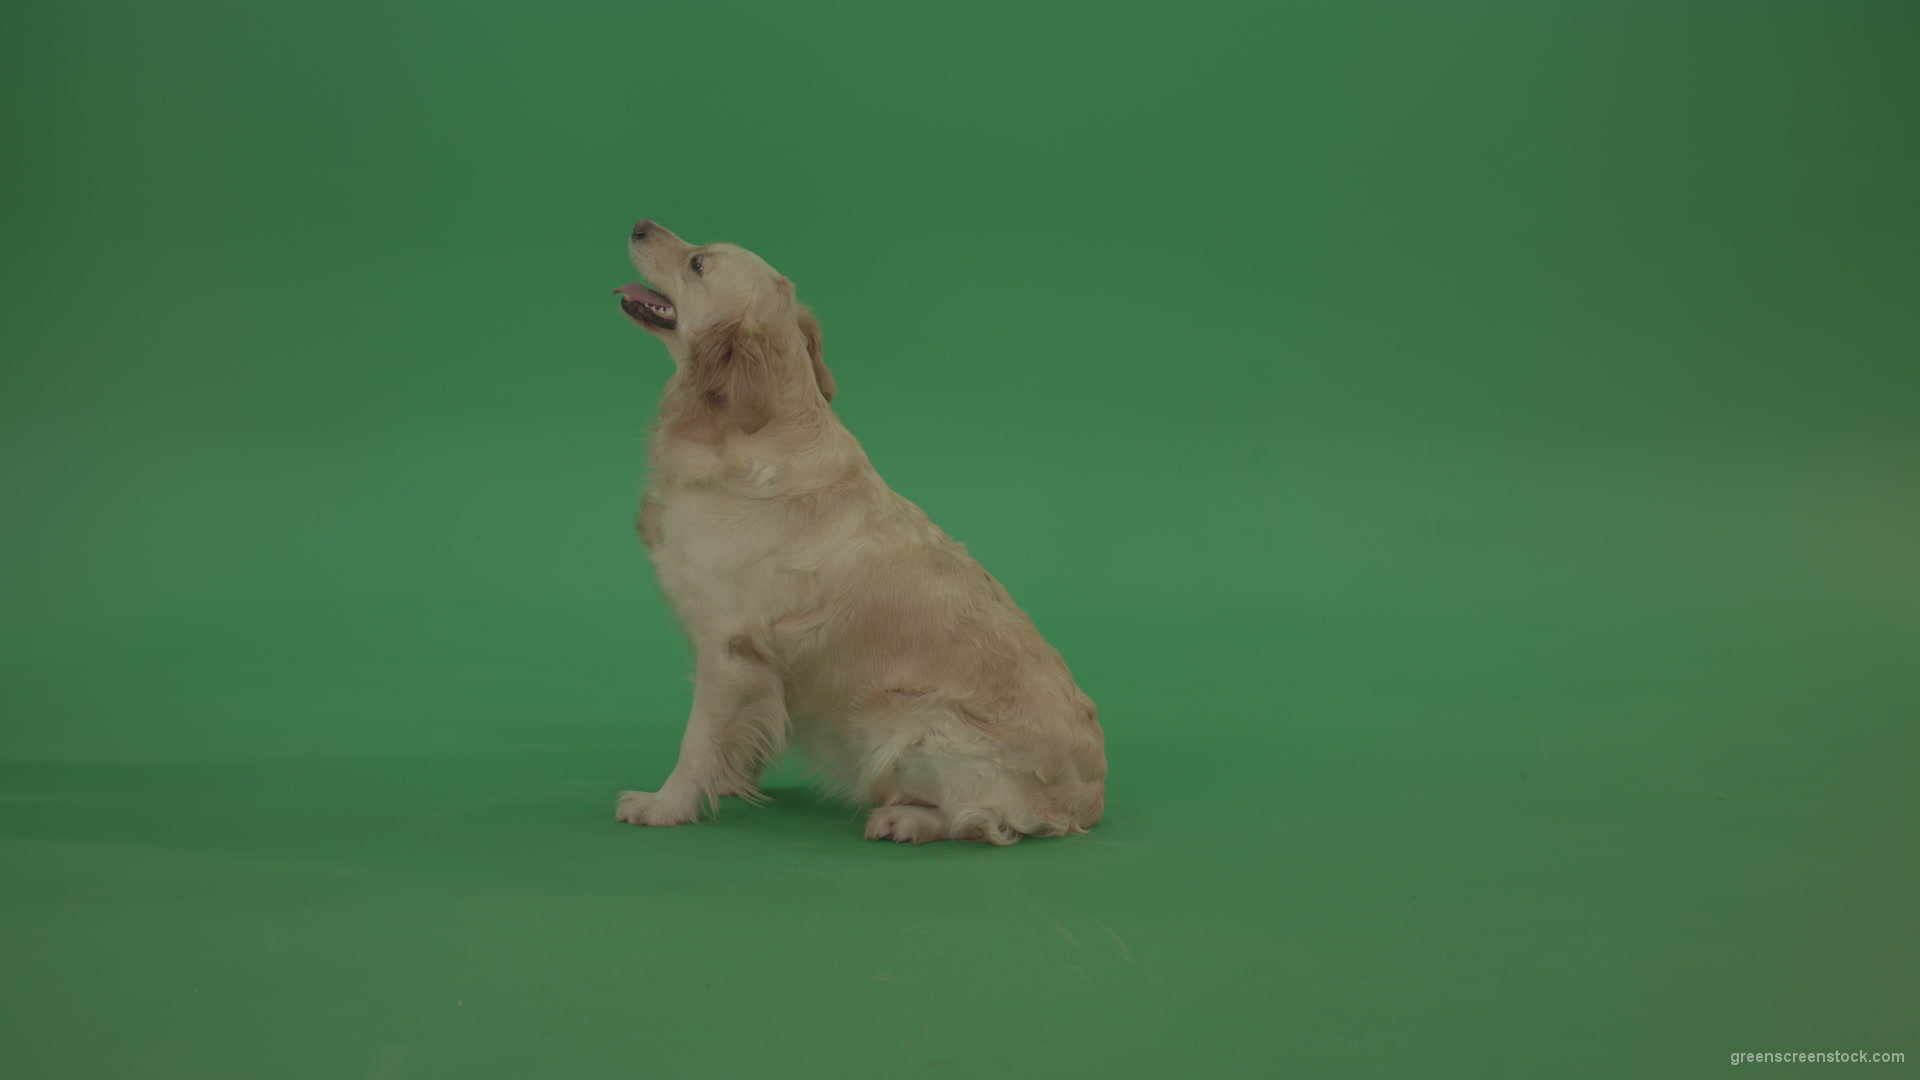 Golden-Retriever-green-screen-dog-in-side-view-barking-isolated-on-chromakey-green-background_001 Green Screen Stock